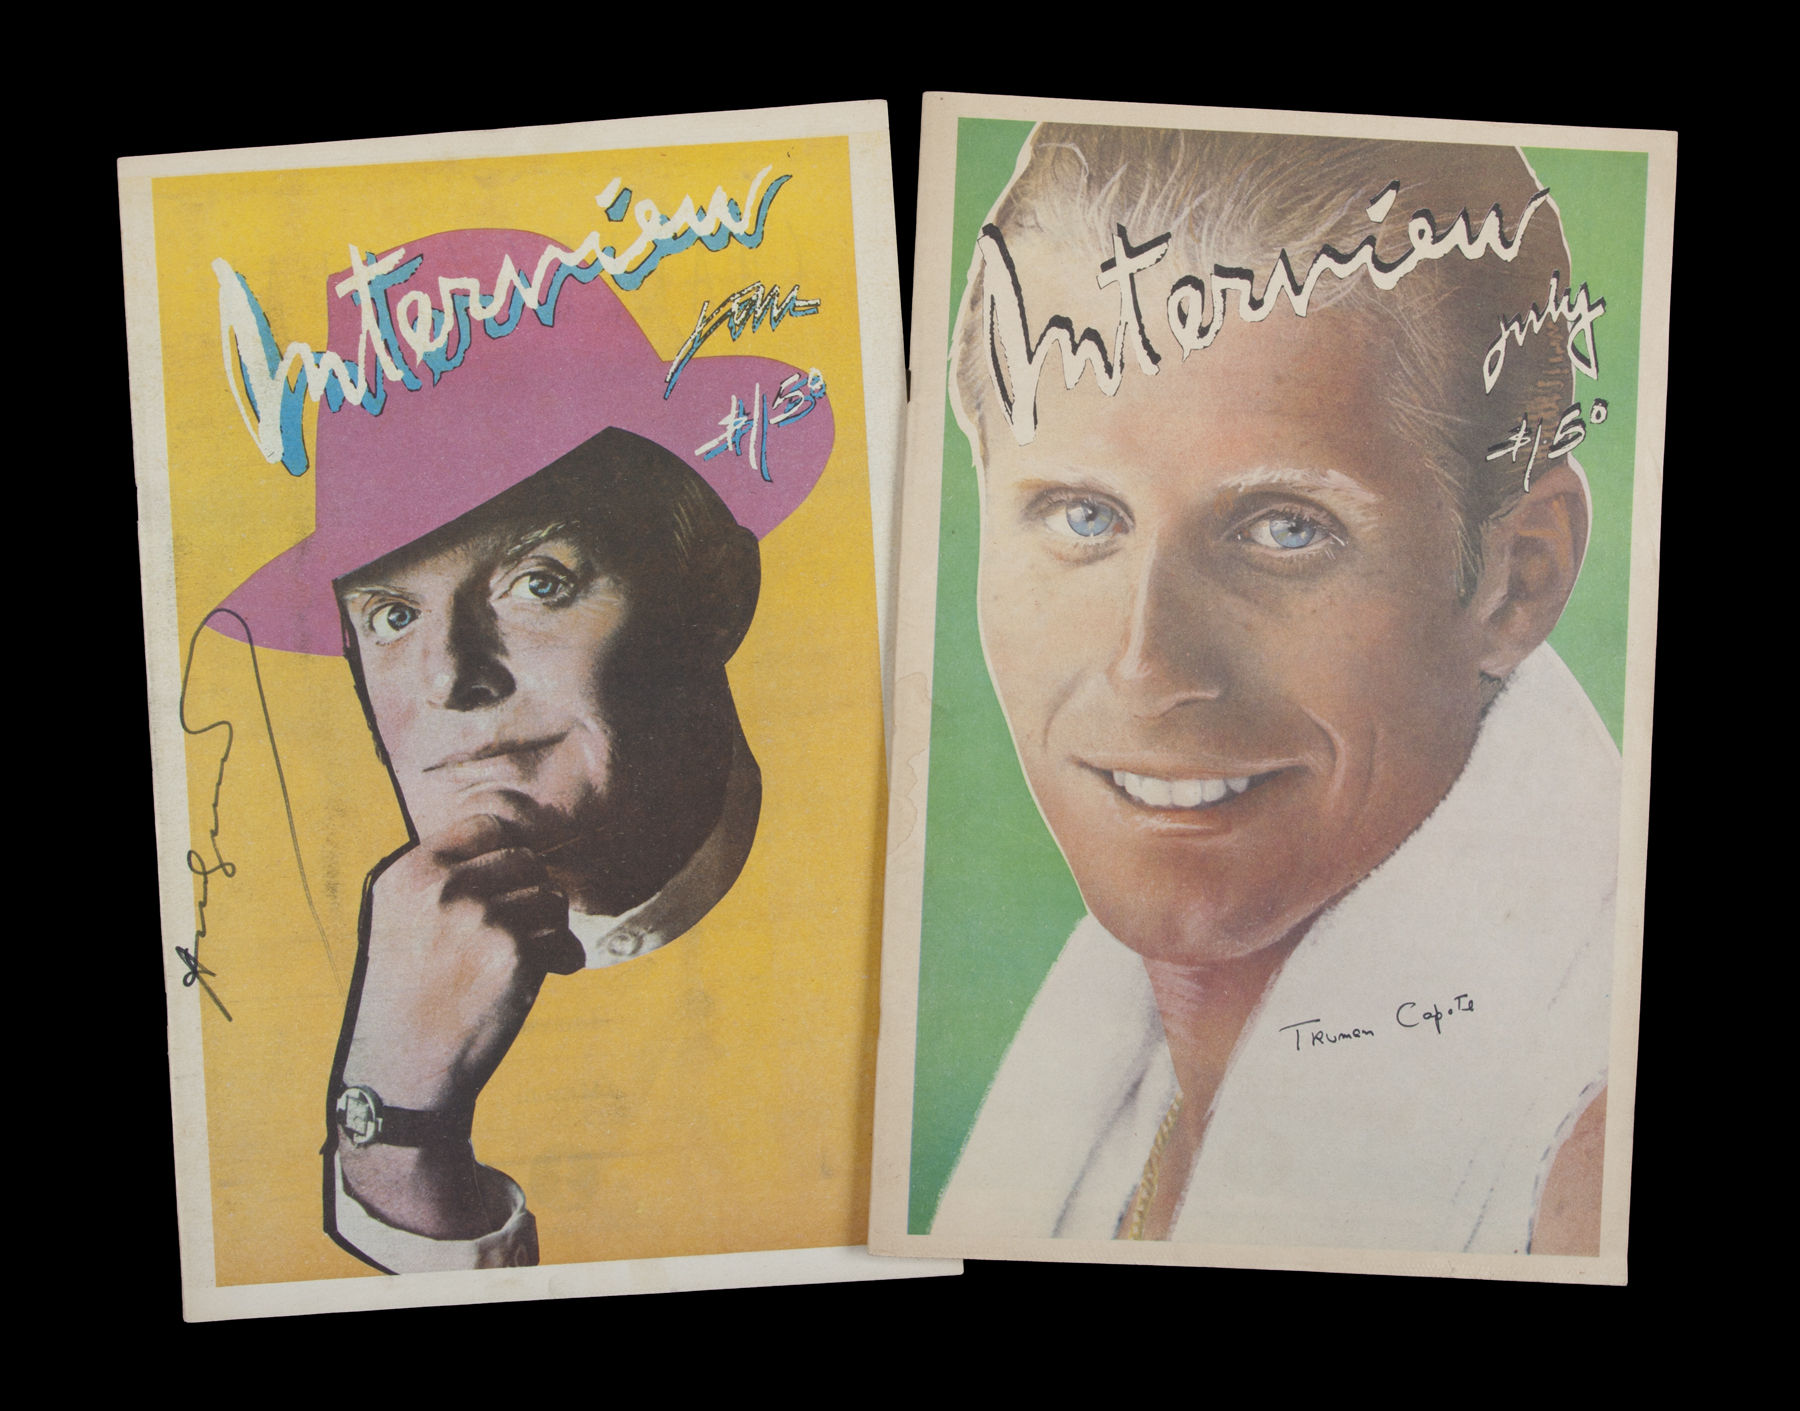 ANDY WARHOL TRUMAN CAPOTE SIGNED INTERVIEW MAGAZINES